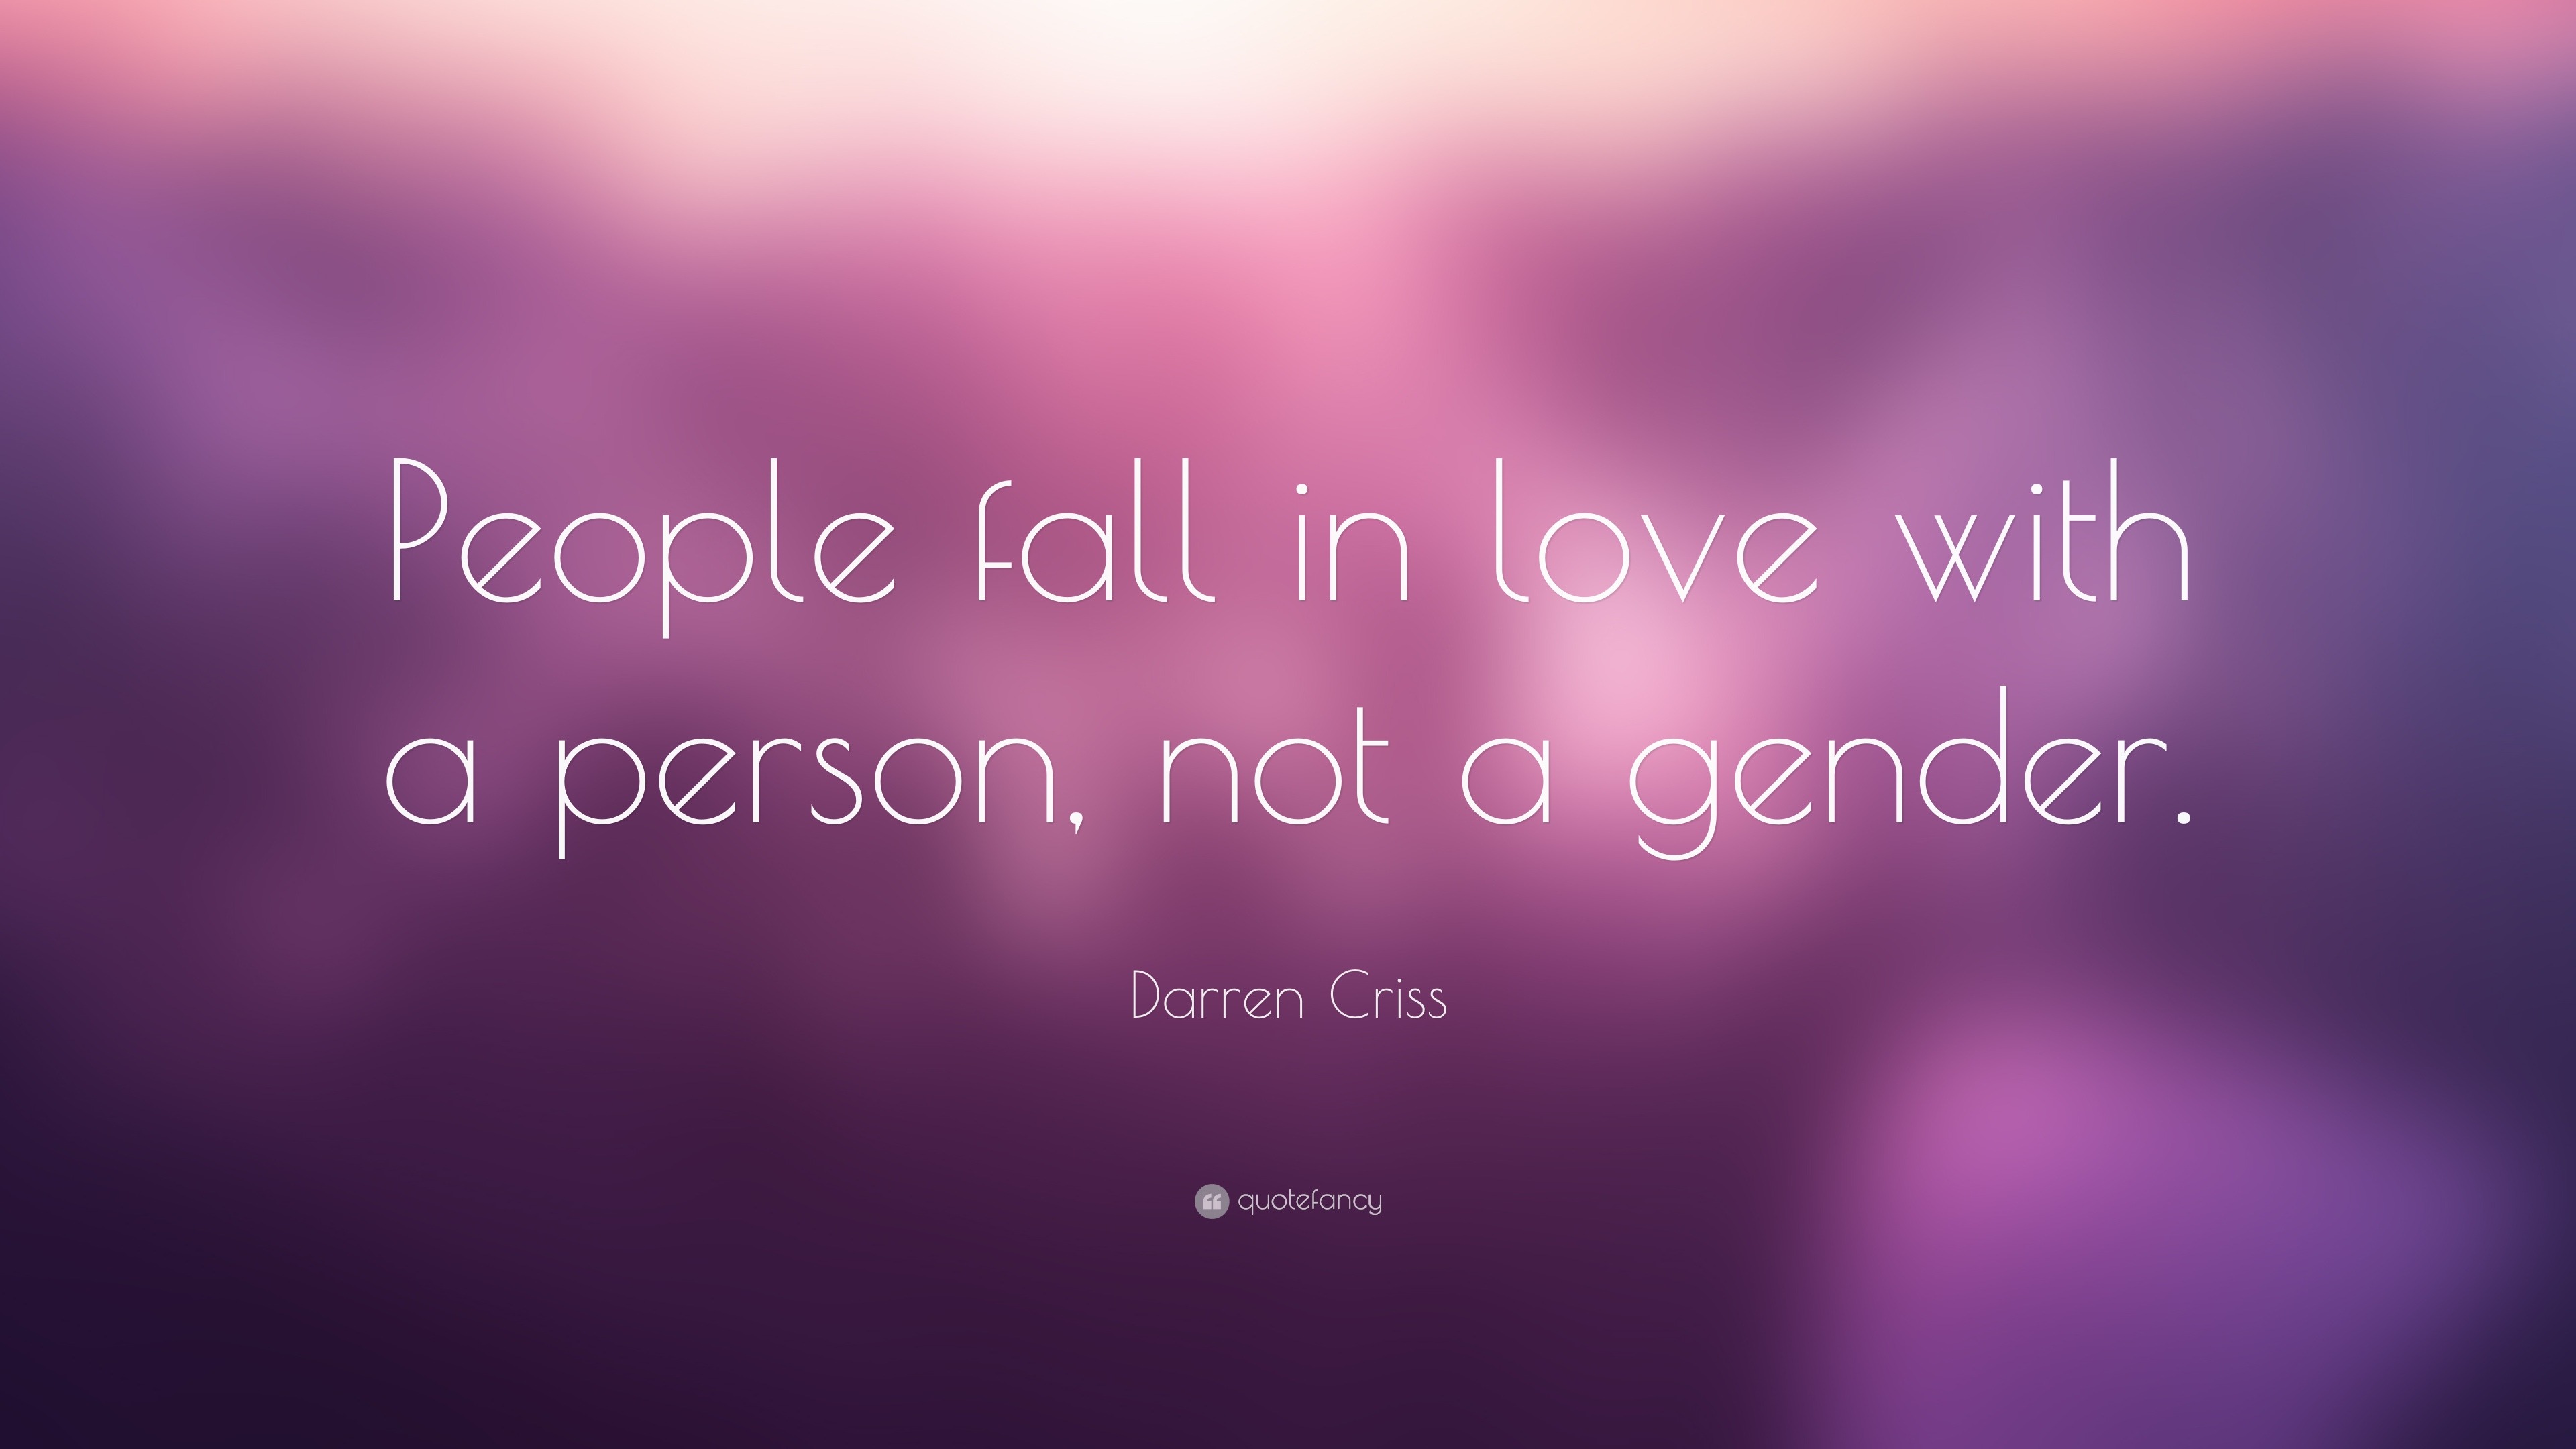 Darren Criss Quote “People fall in love with a person not a gender